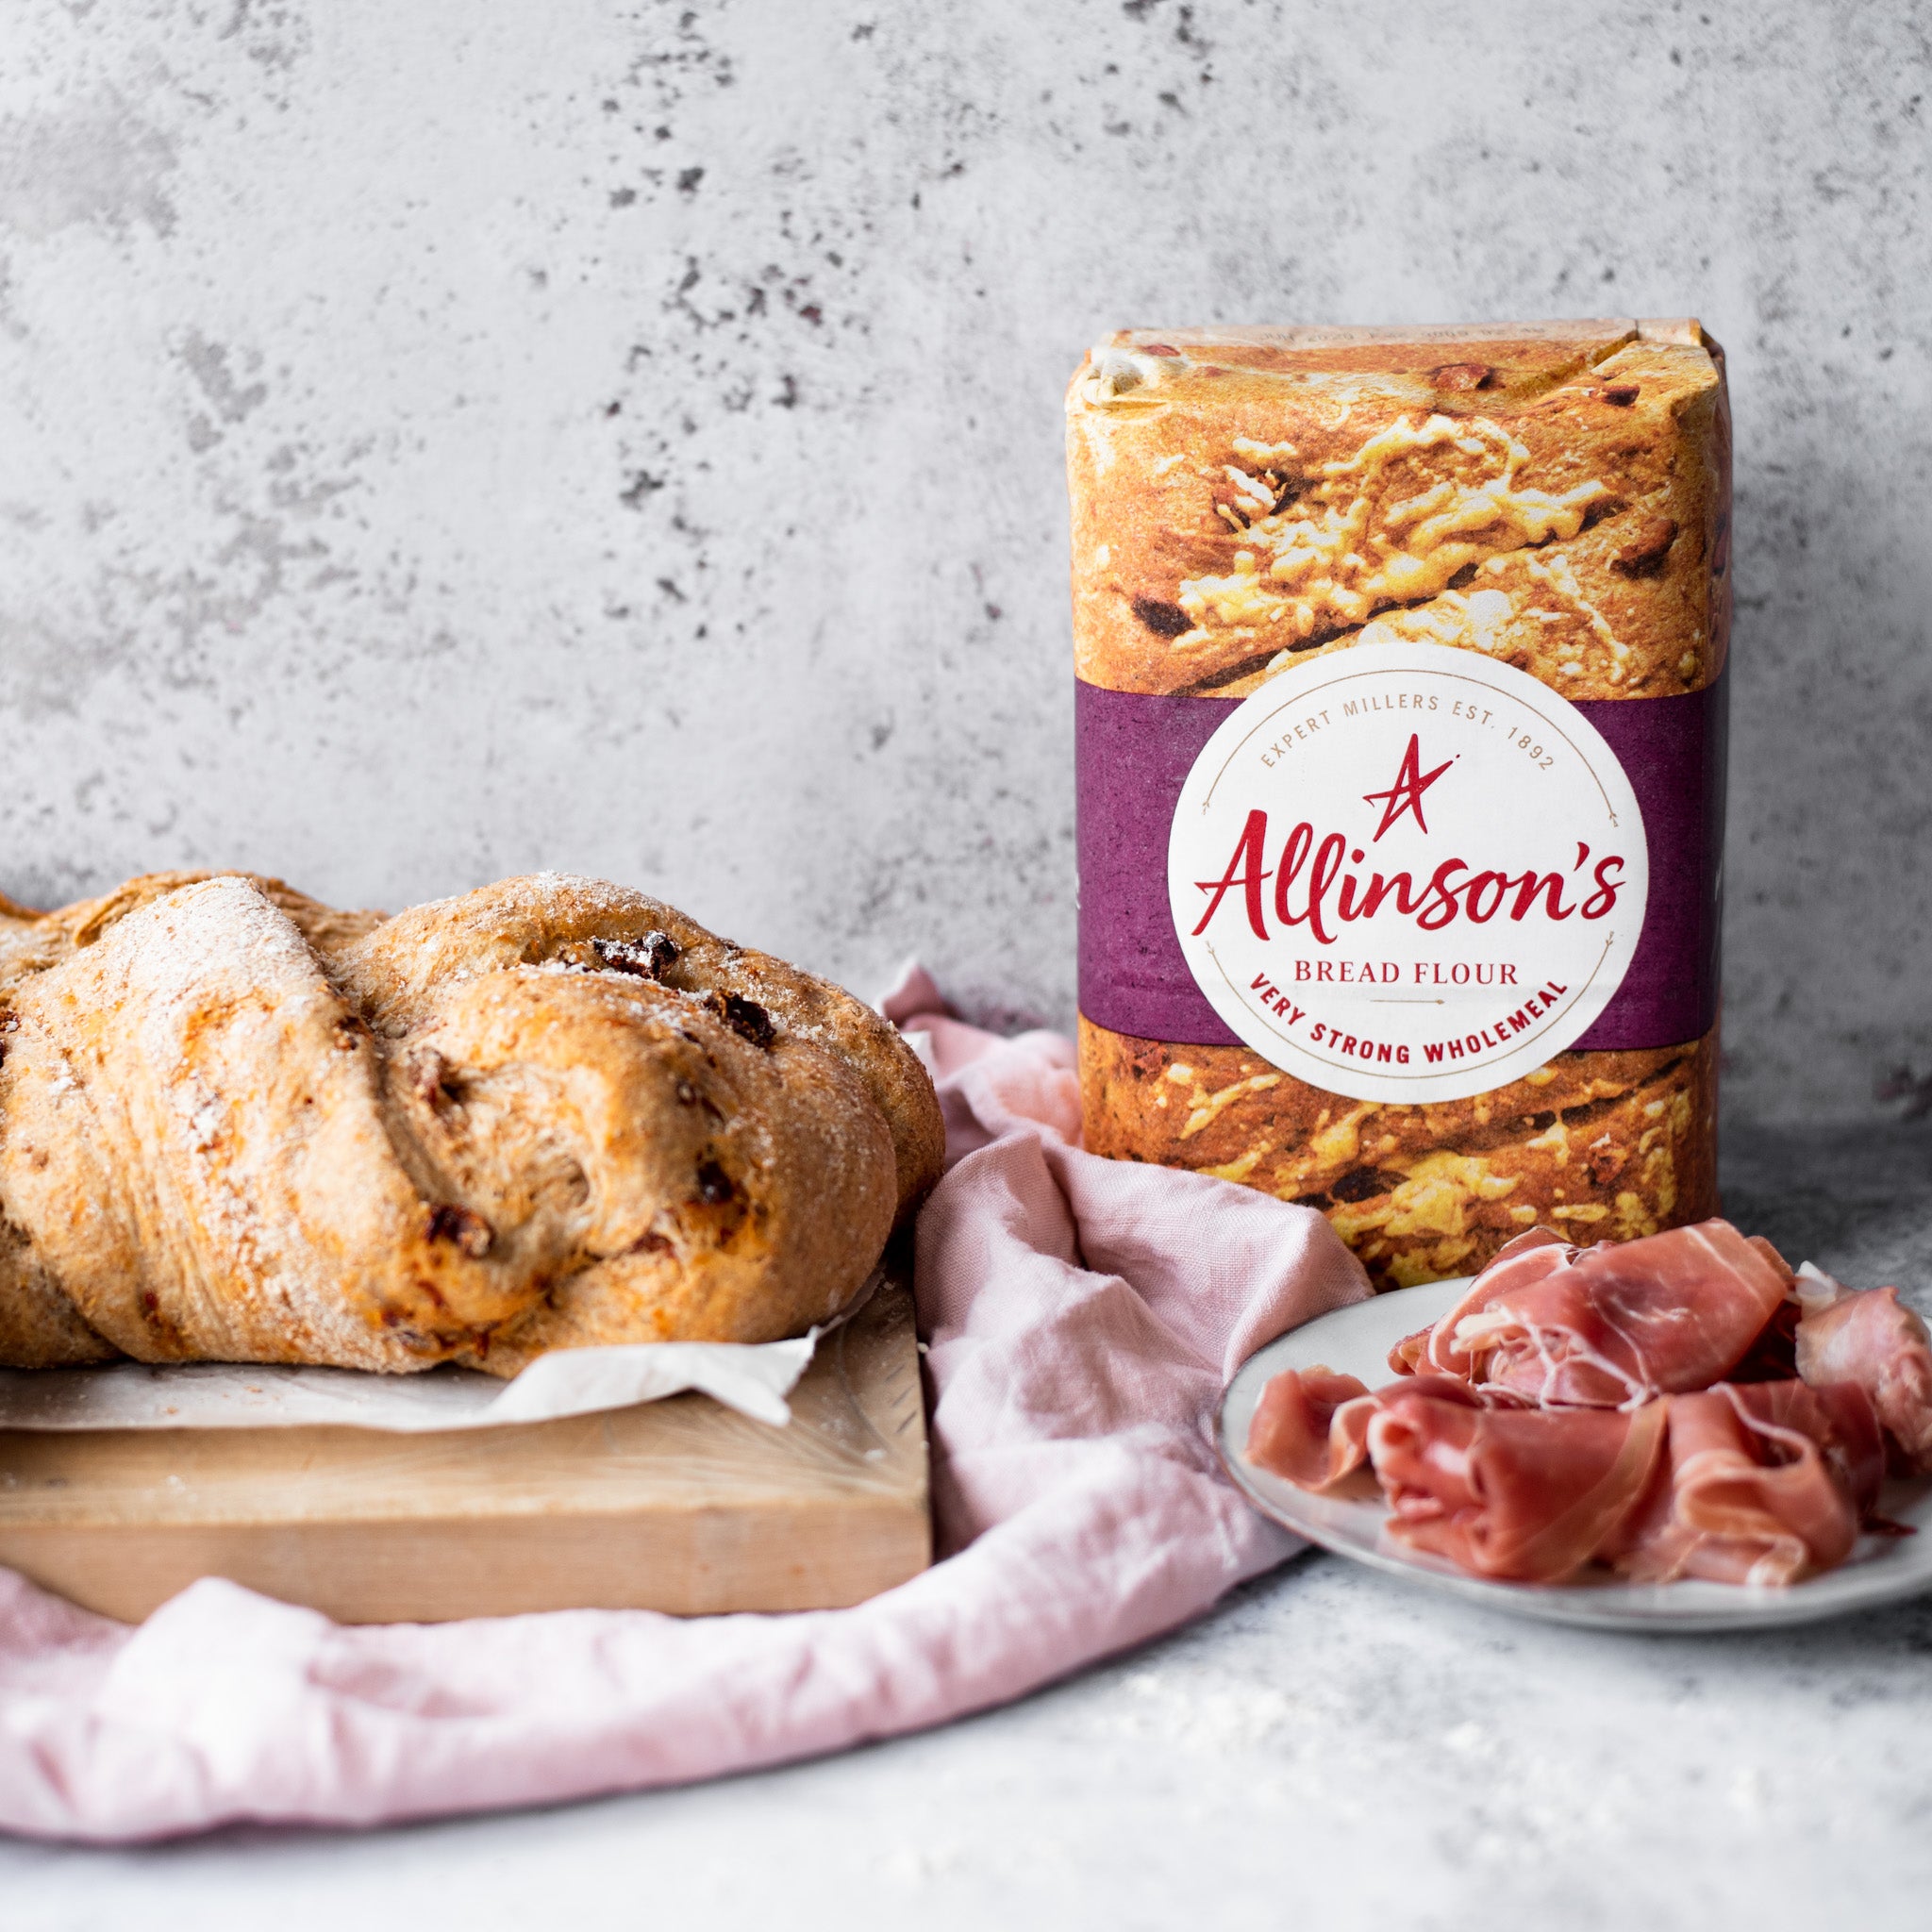 Allinsons-Proscuitto-Sun-Dried-Tomato-Plait-1-1-Baking-Mad-1.jpg